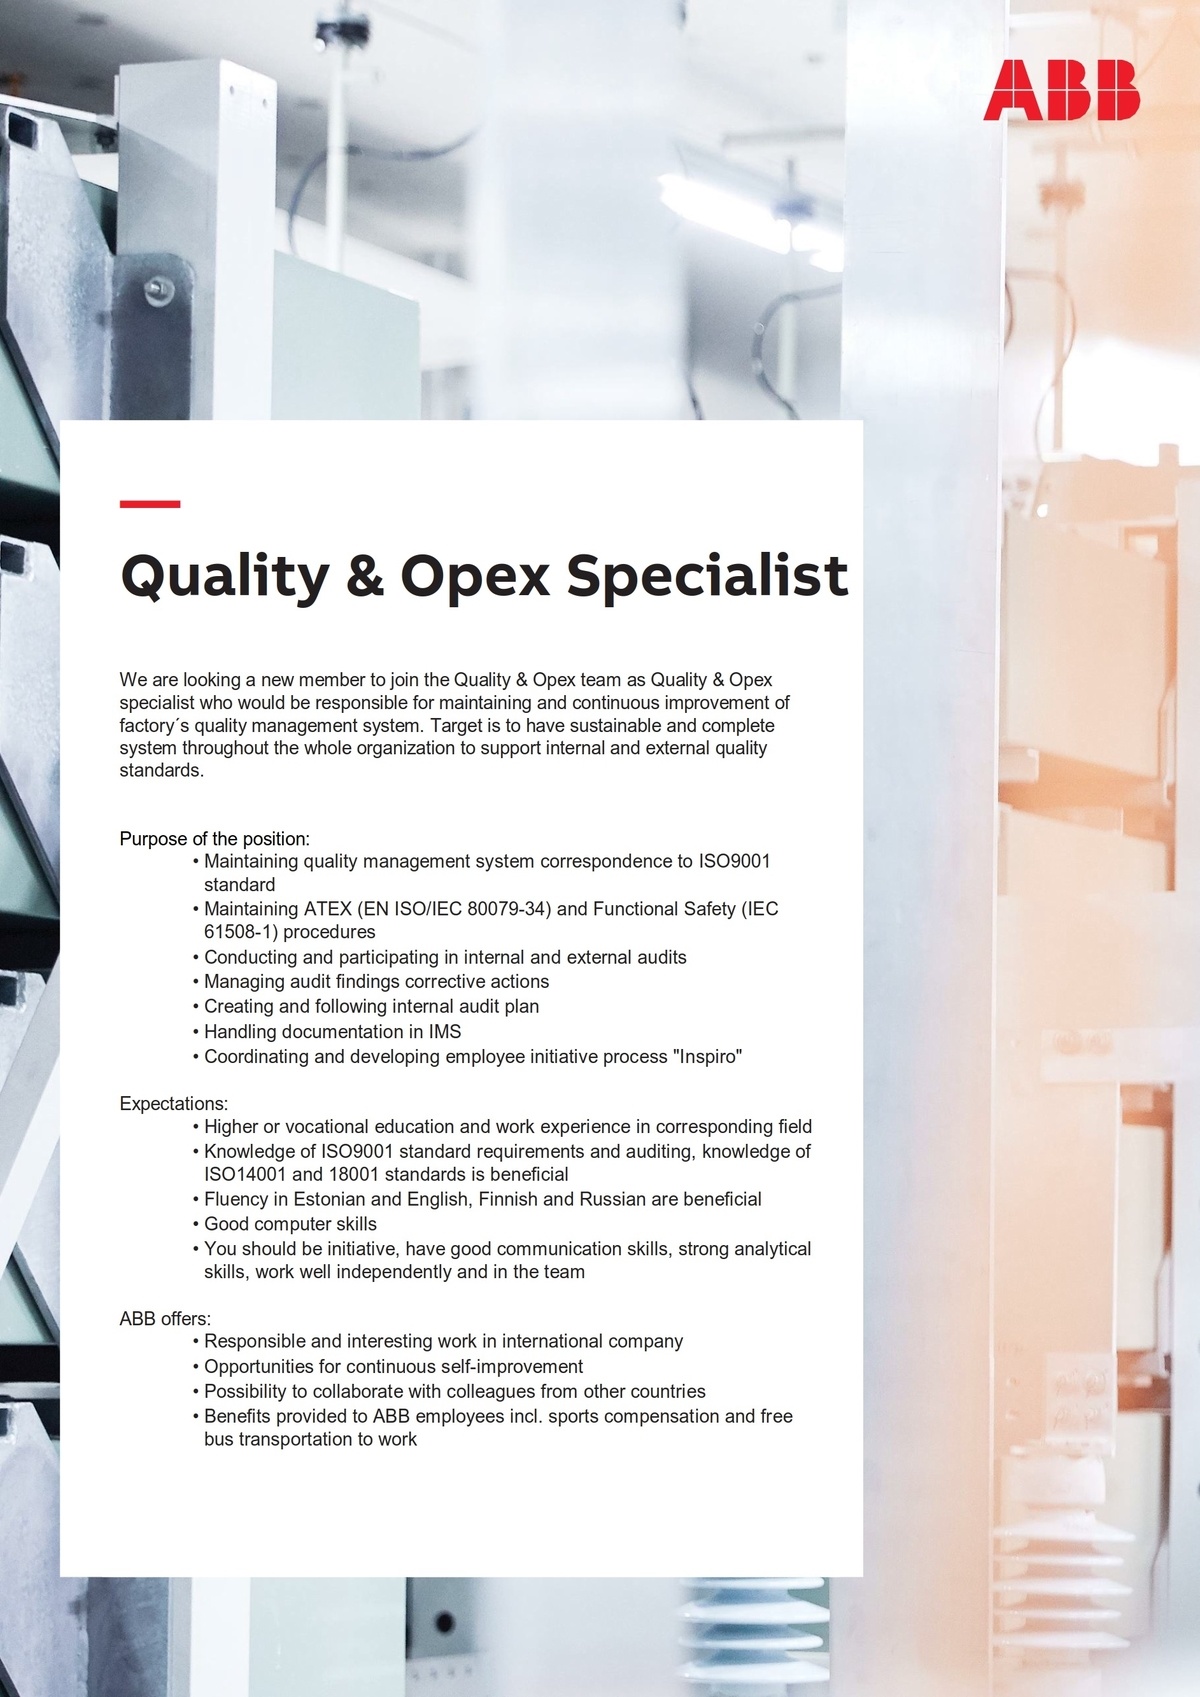 ABB AS Quality & Opex Specialist